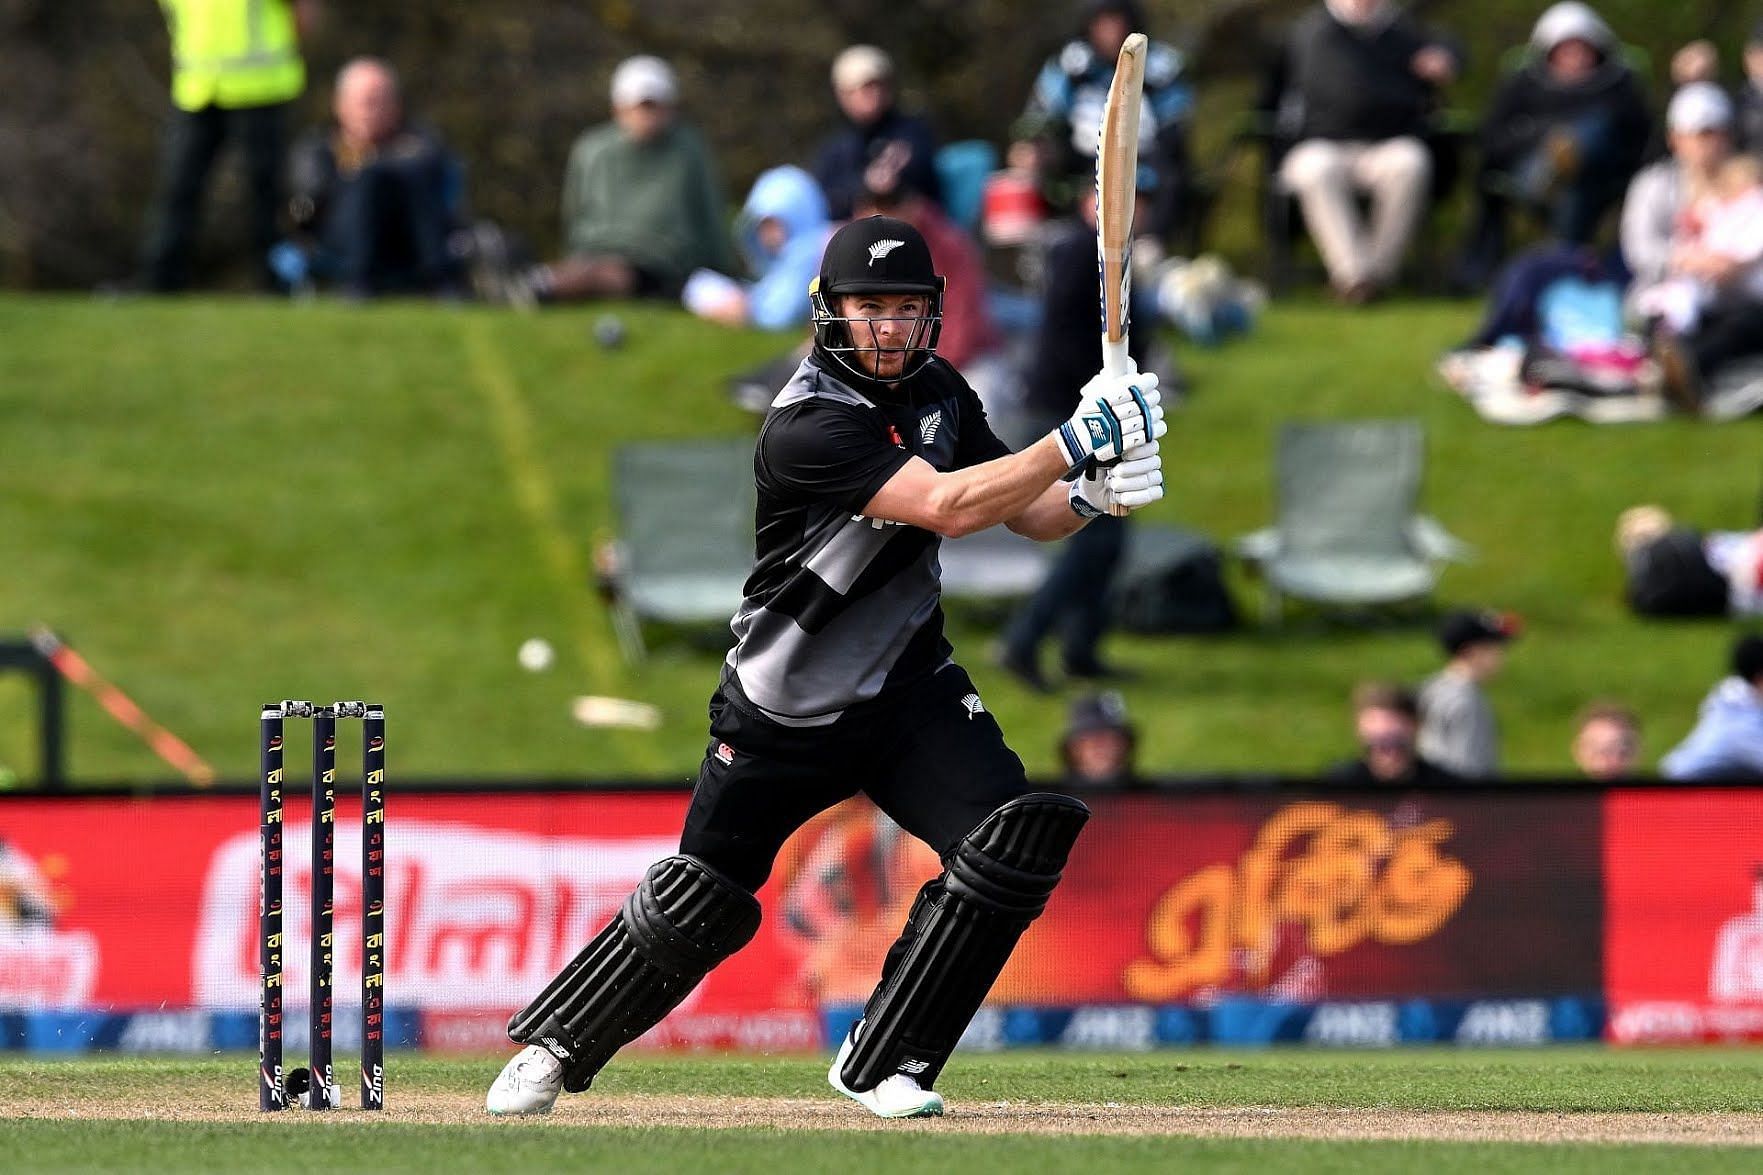 nz-vs-sa-dream11-prediction-fantasy-cricket-tips-today-s-playing-xis-player-stats-and-pitch-report-for-icc-mens-t20-world-cup-2022-warm-up-matches-match-10